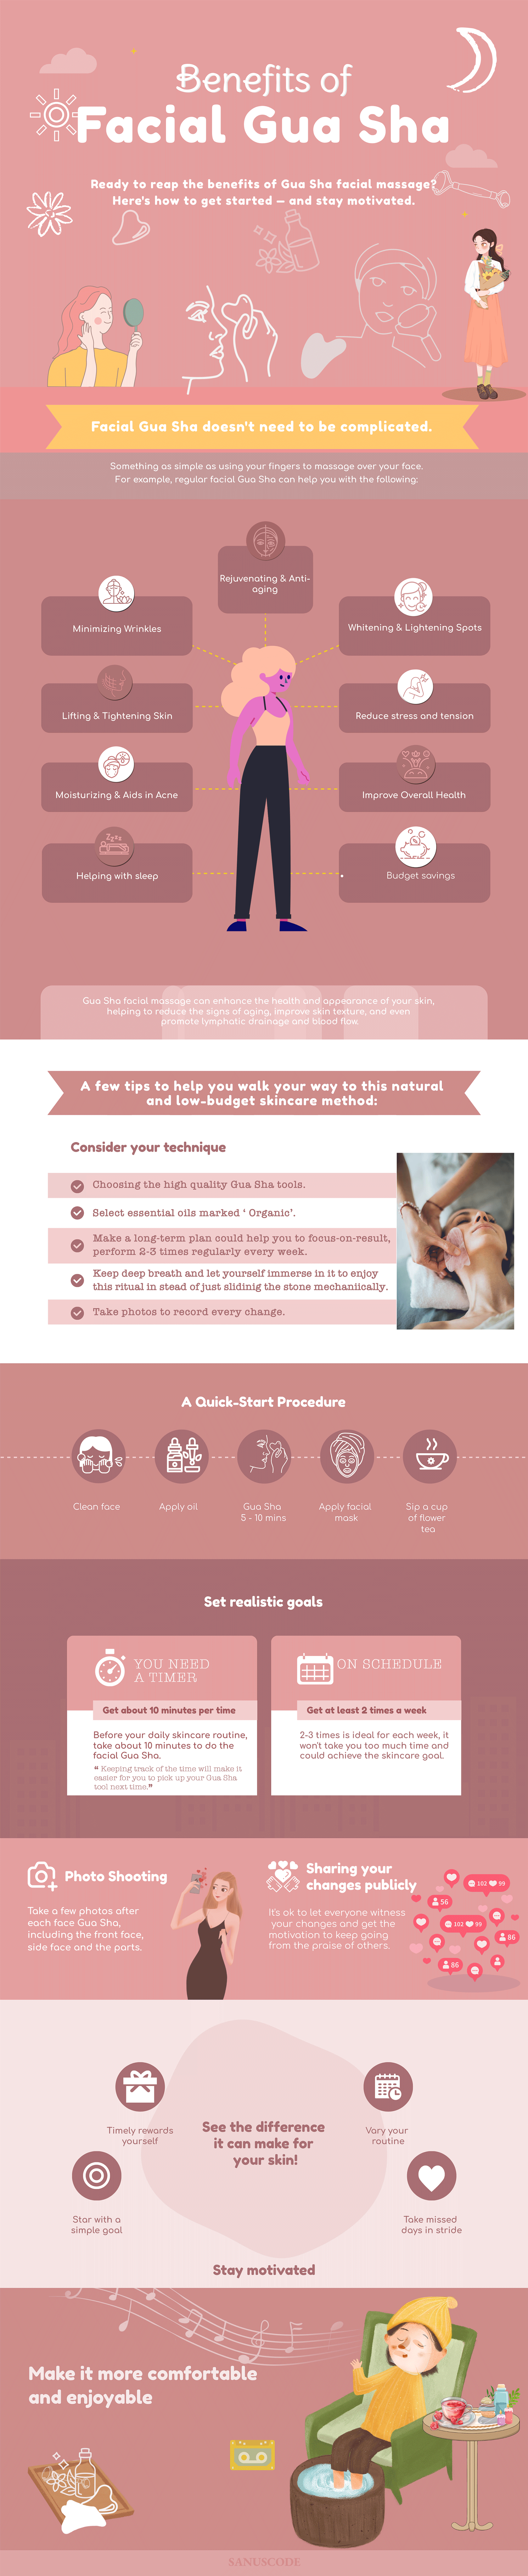 nine 9 benefits of facial gua sha massage infographic warm tips to use this traditional Chinese medical skincare for long time to improve overall health and skin, pink background